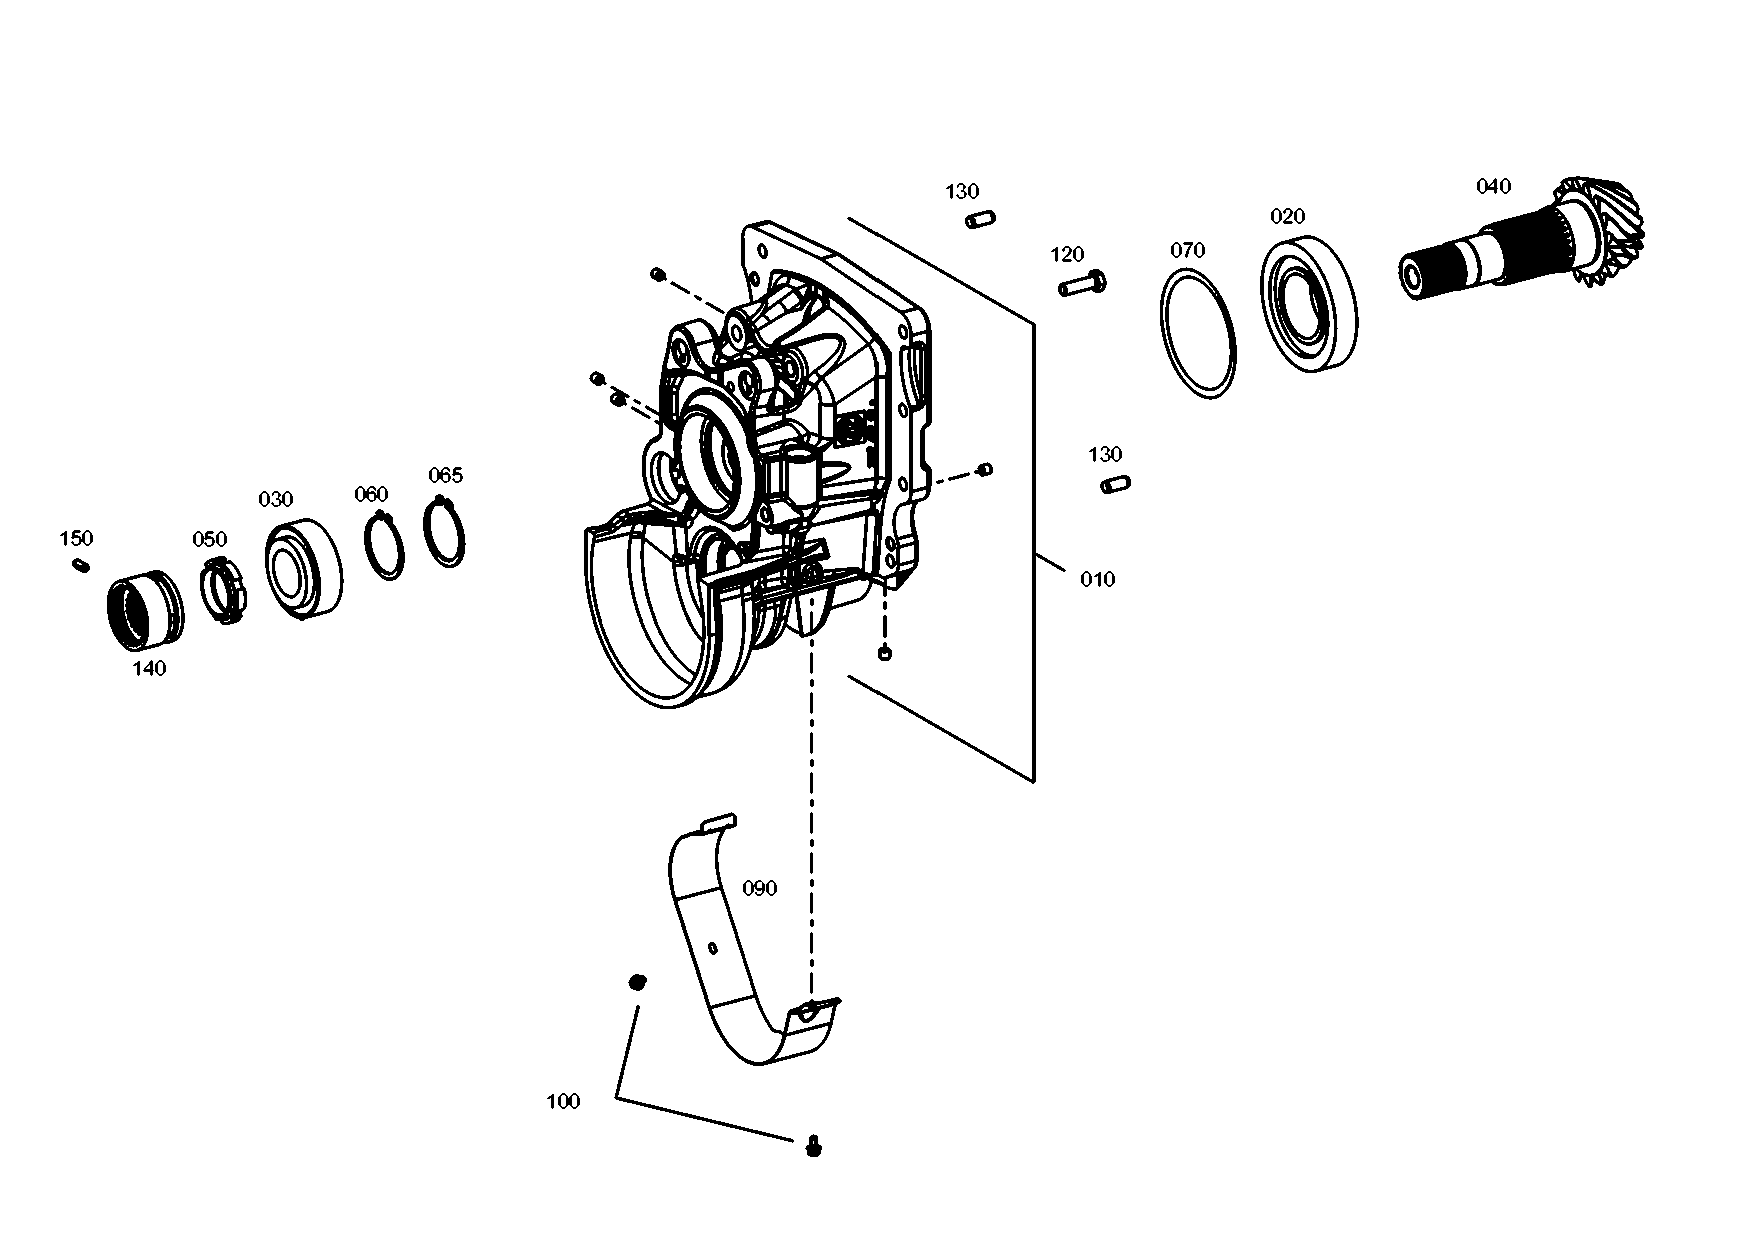 drawing for LUNA EQUIPOS INDUSTRIEALES, S.A. 199118250361 - ADJUSTMENT PLATE (figure 4)